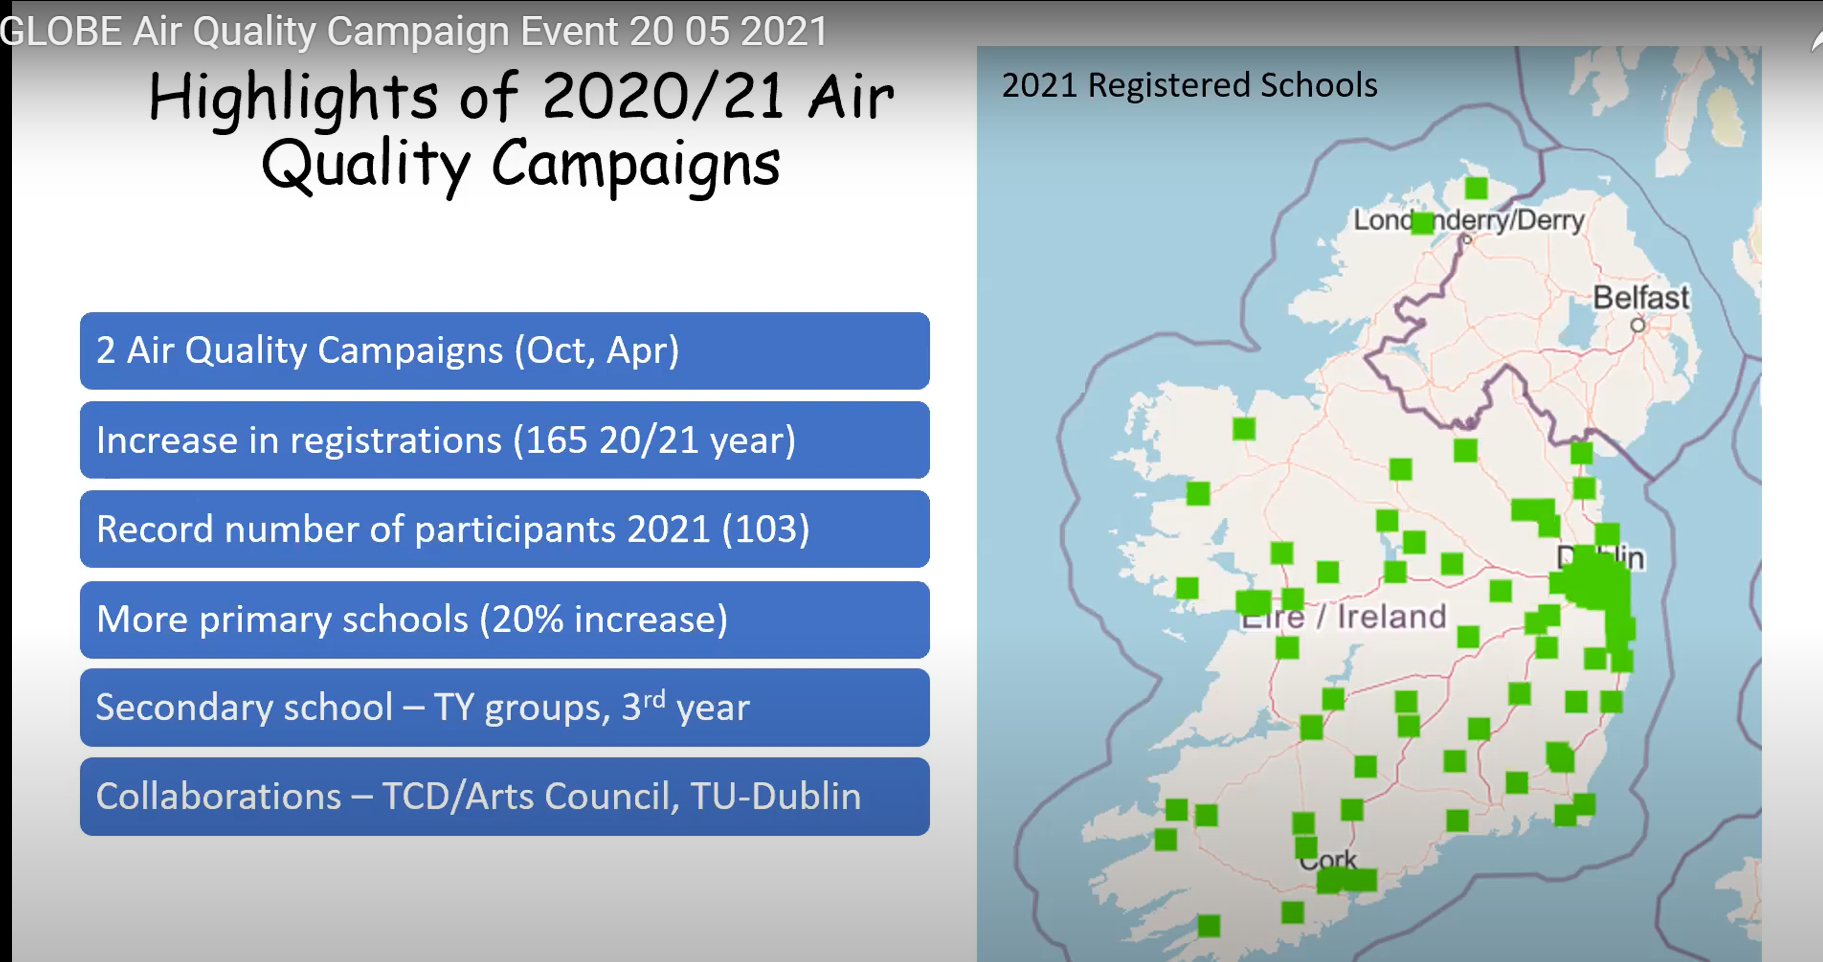 A screenshot from the online event, showing a map of Ireland and the participating schools